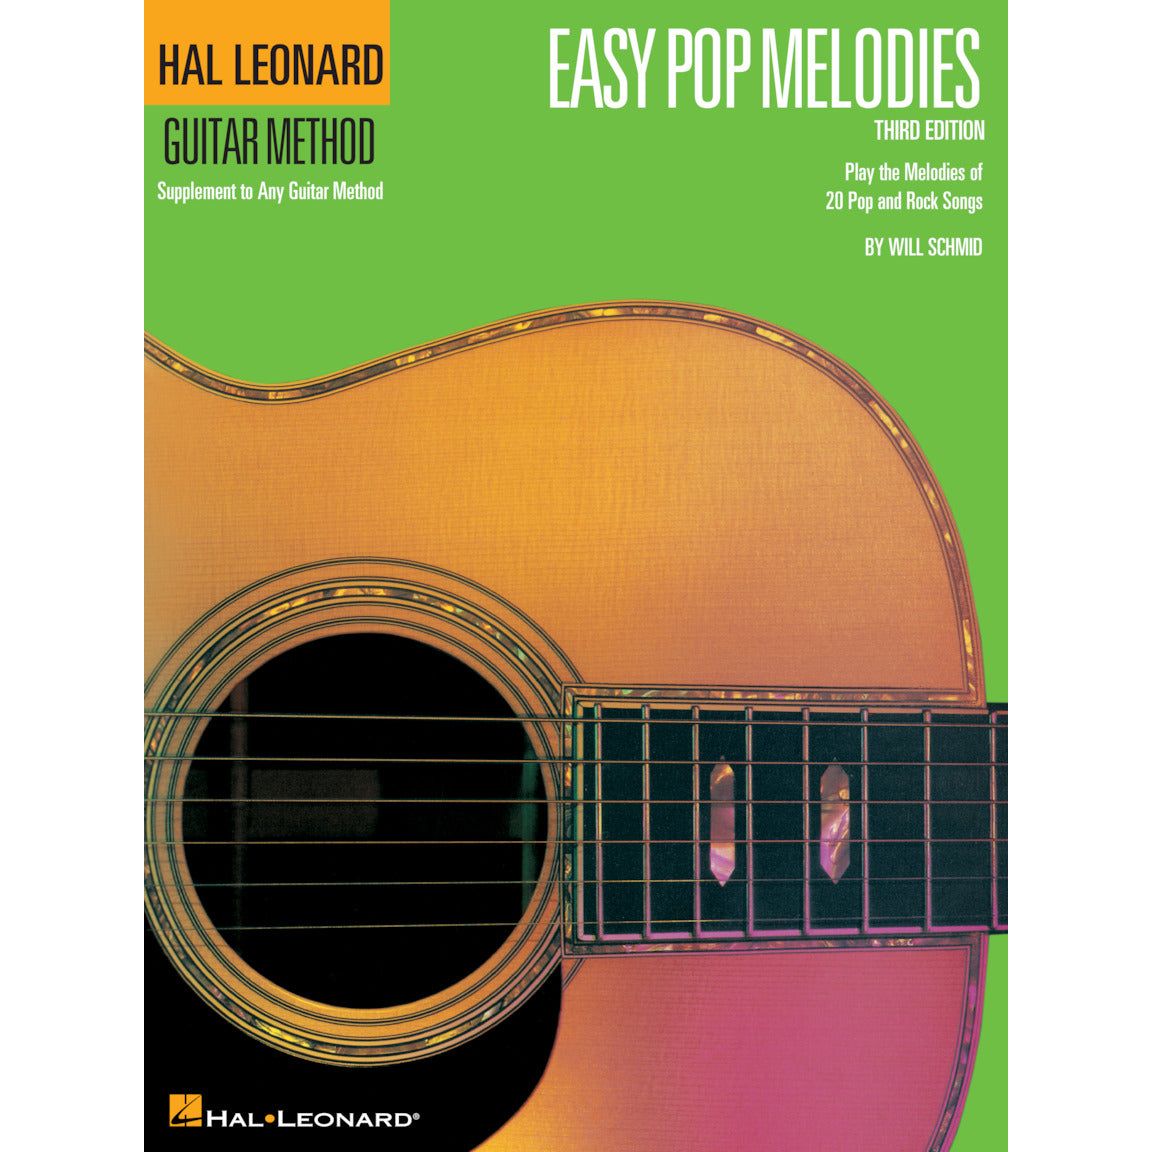 Guitar Method Easy Pop Melodies - 3rd Edition